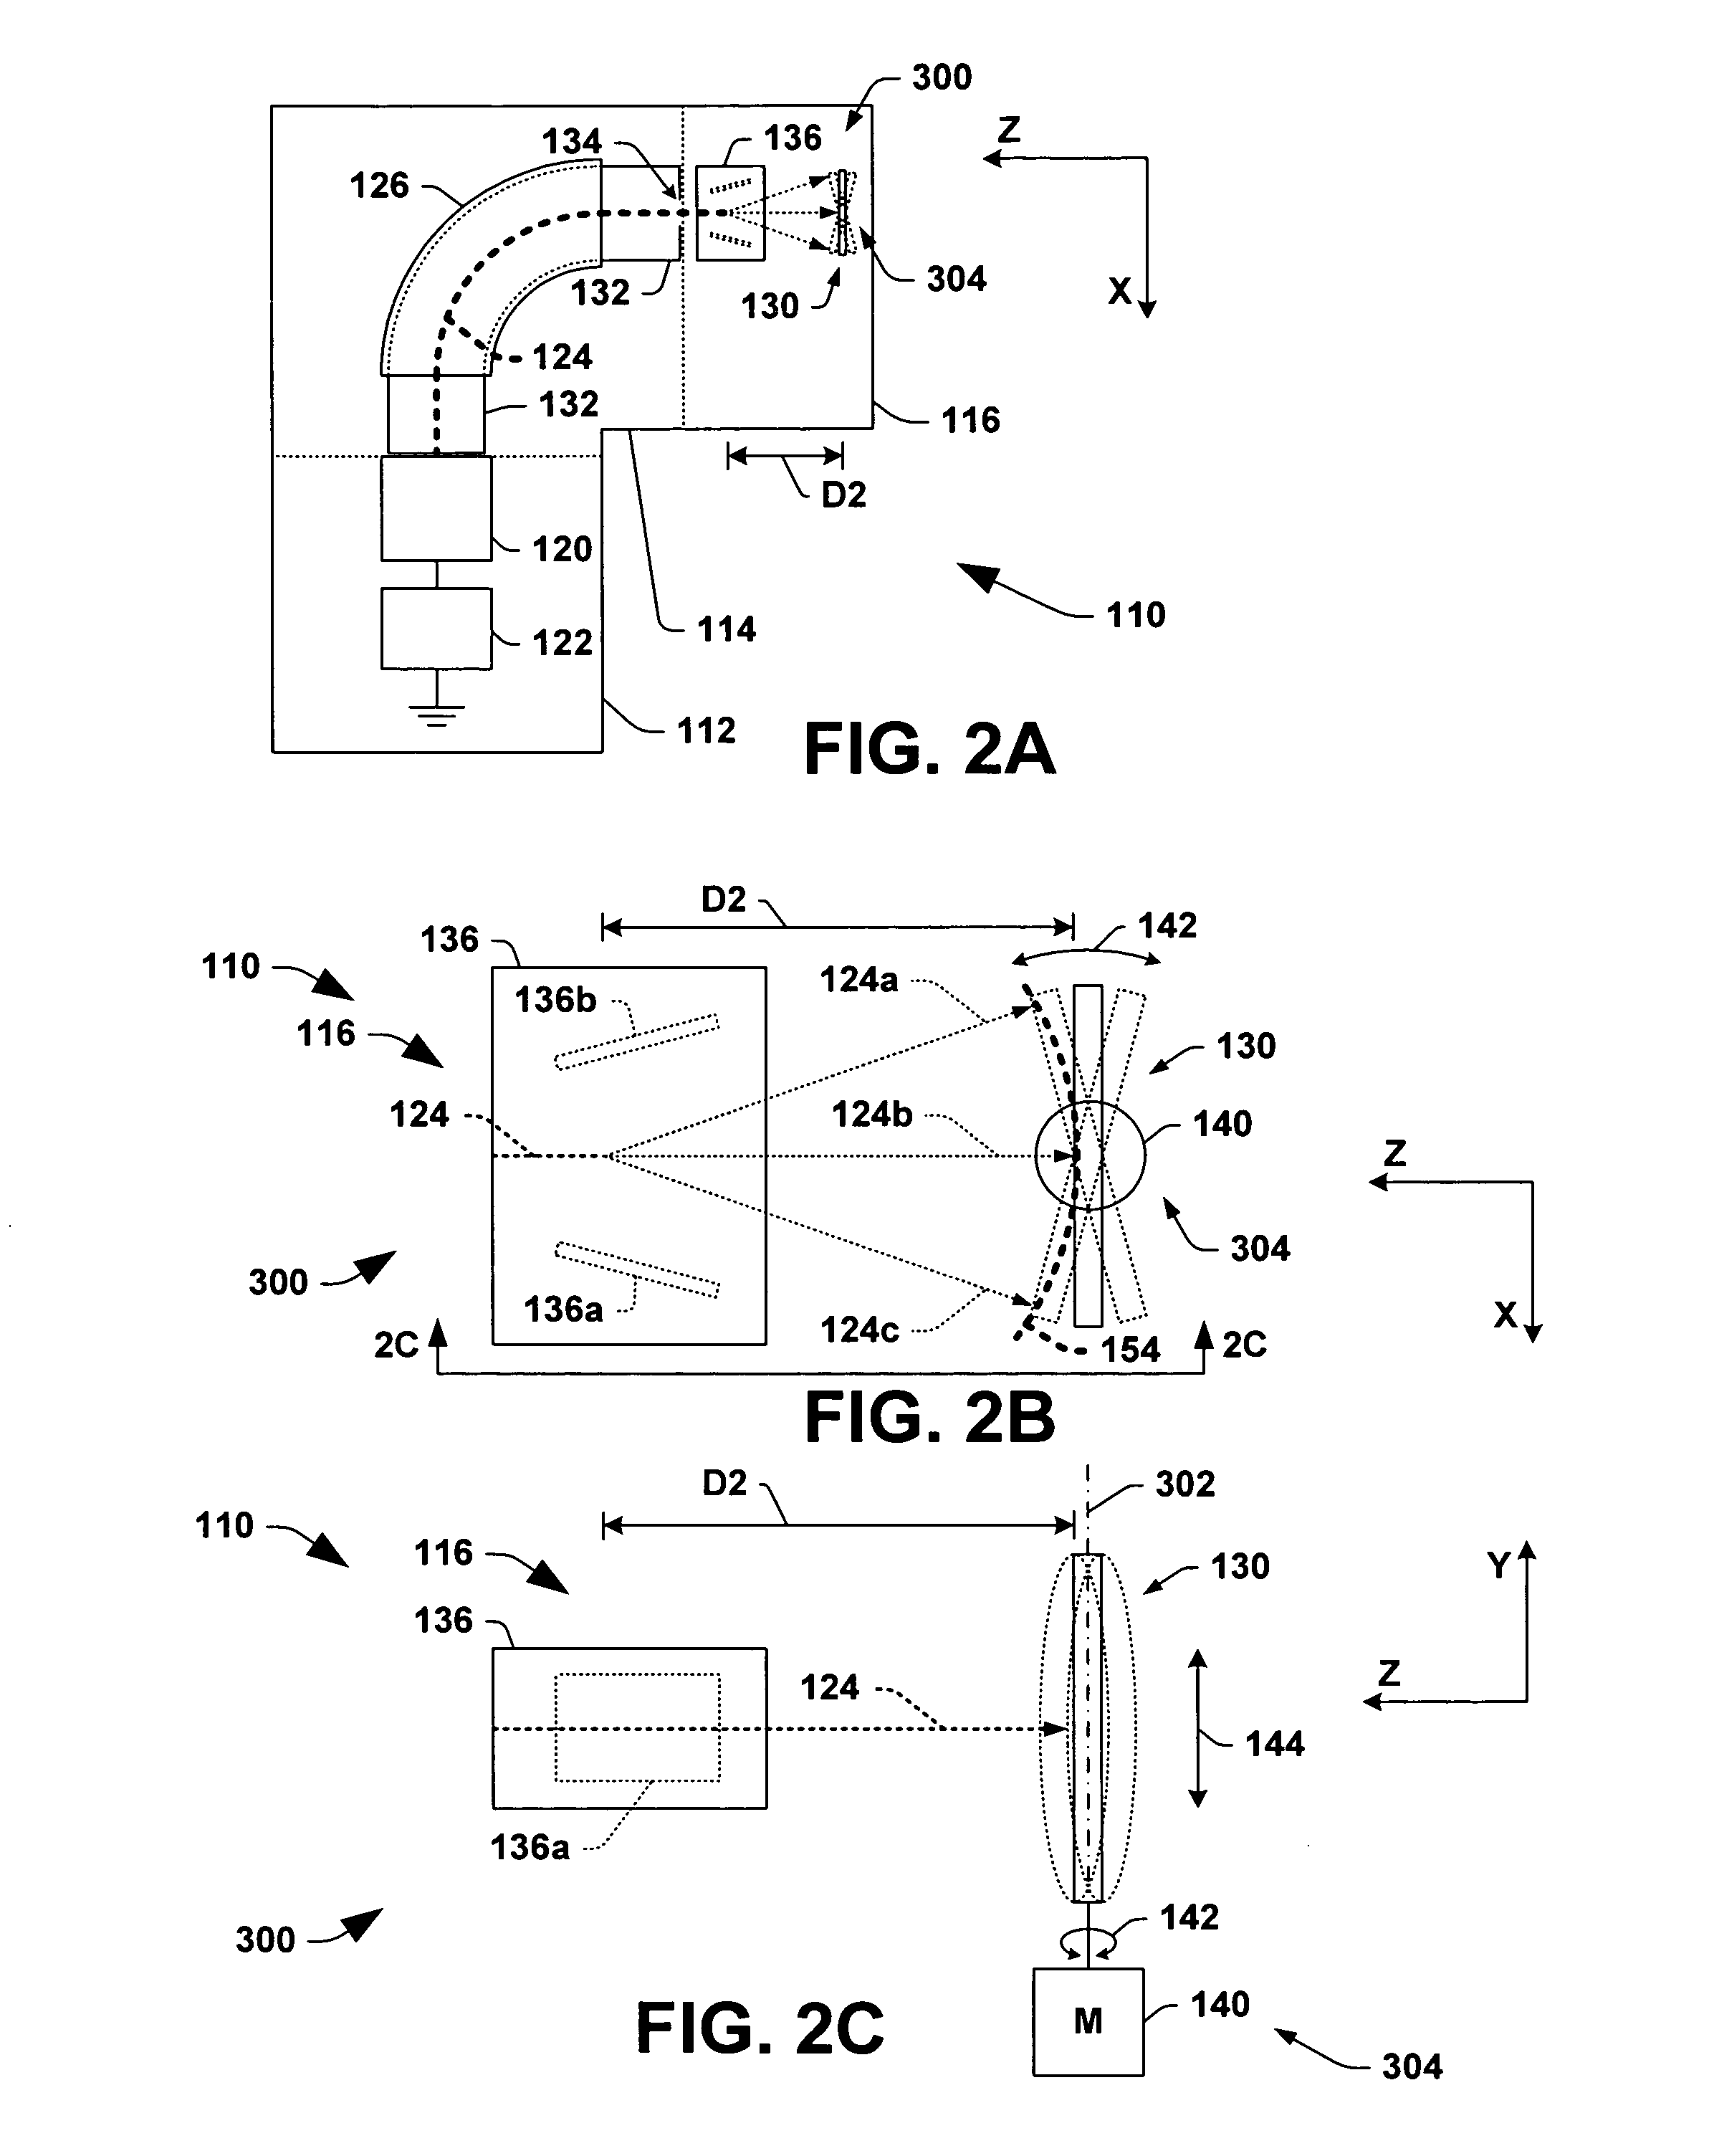 Scanning systems and methods for providing ions from an ion beam to a workpiece